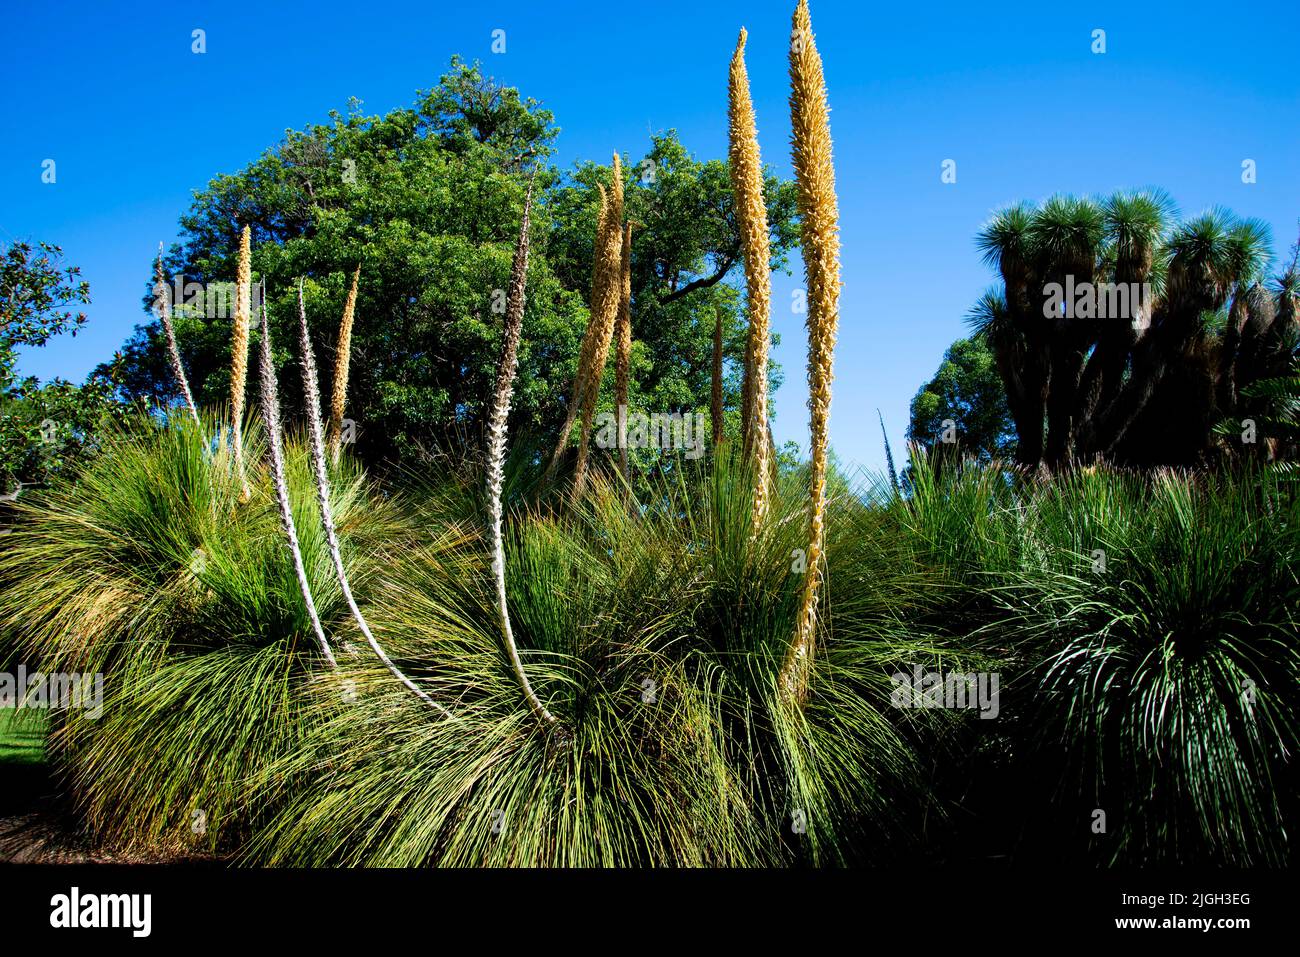 Dasylirion Plant from the Asparagus Family Stock Photo